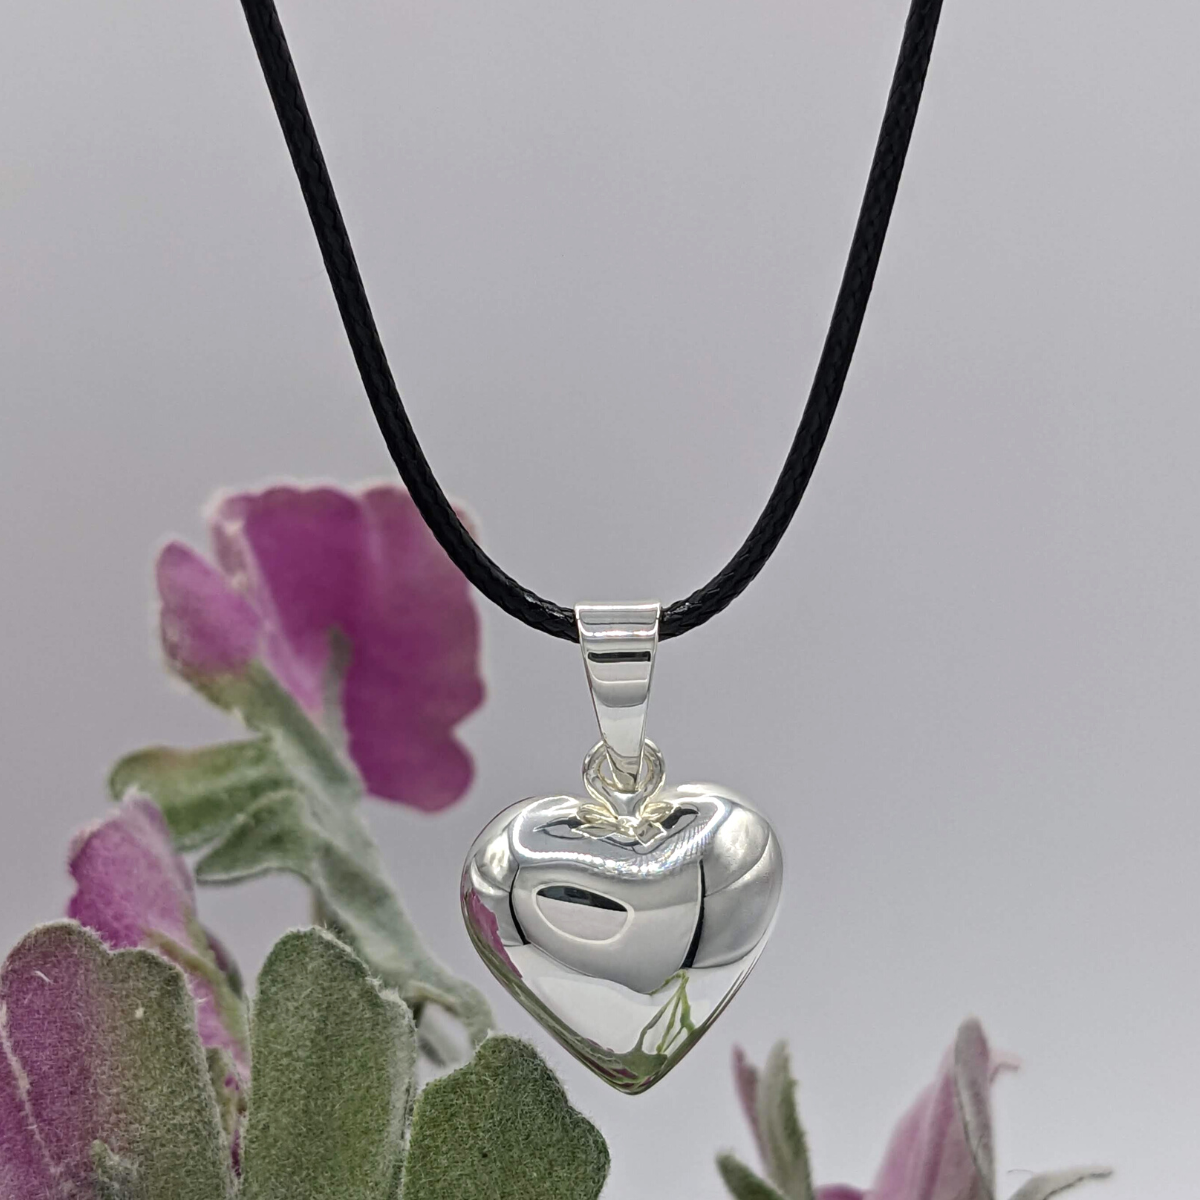 Heart Shaped Chime Necklace